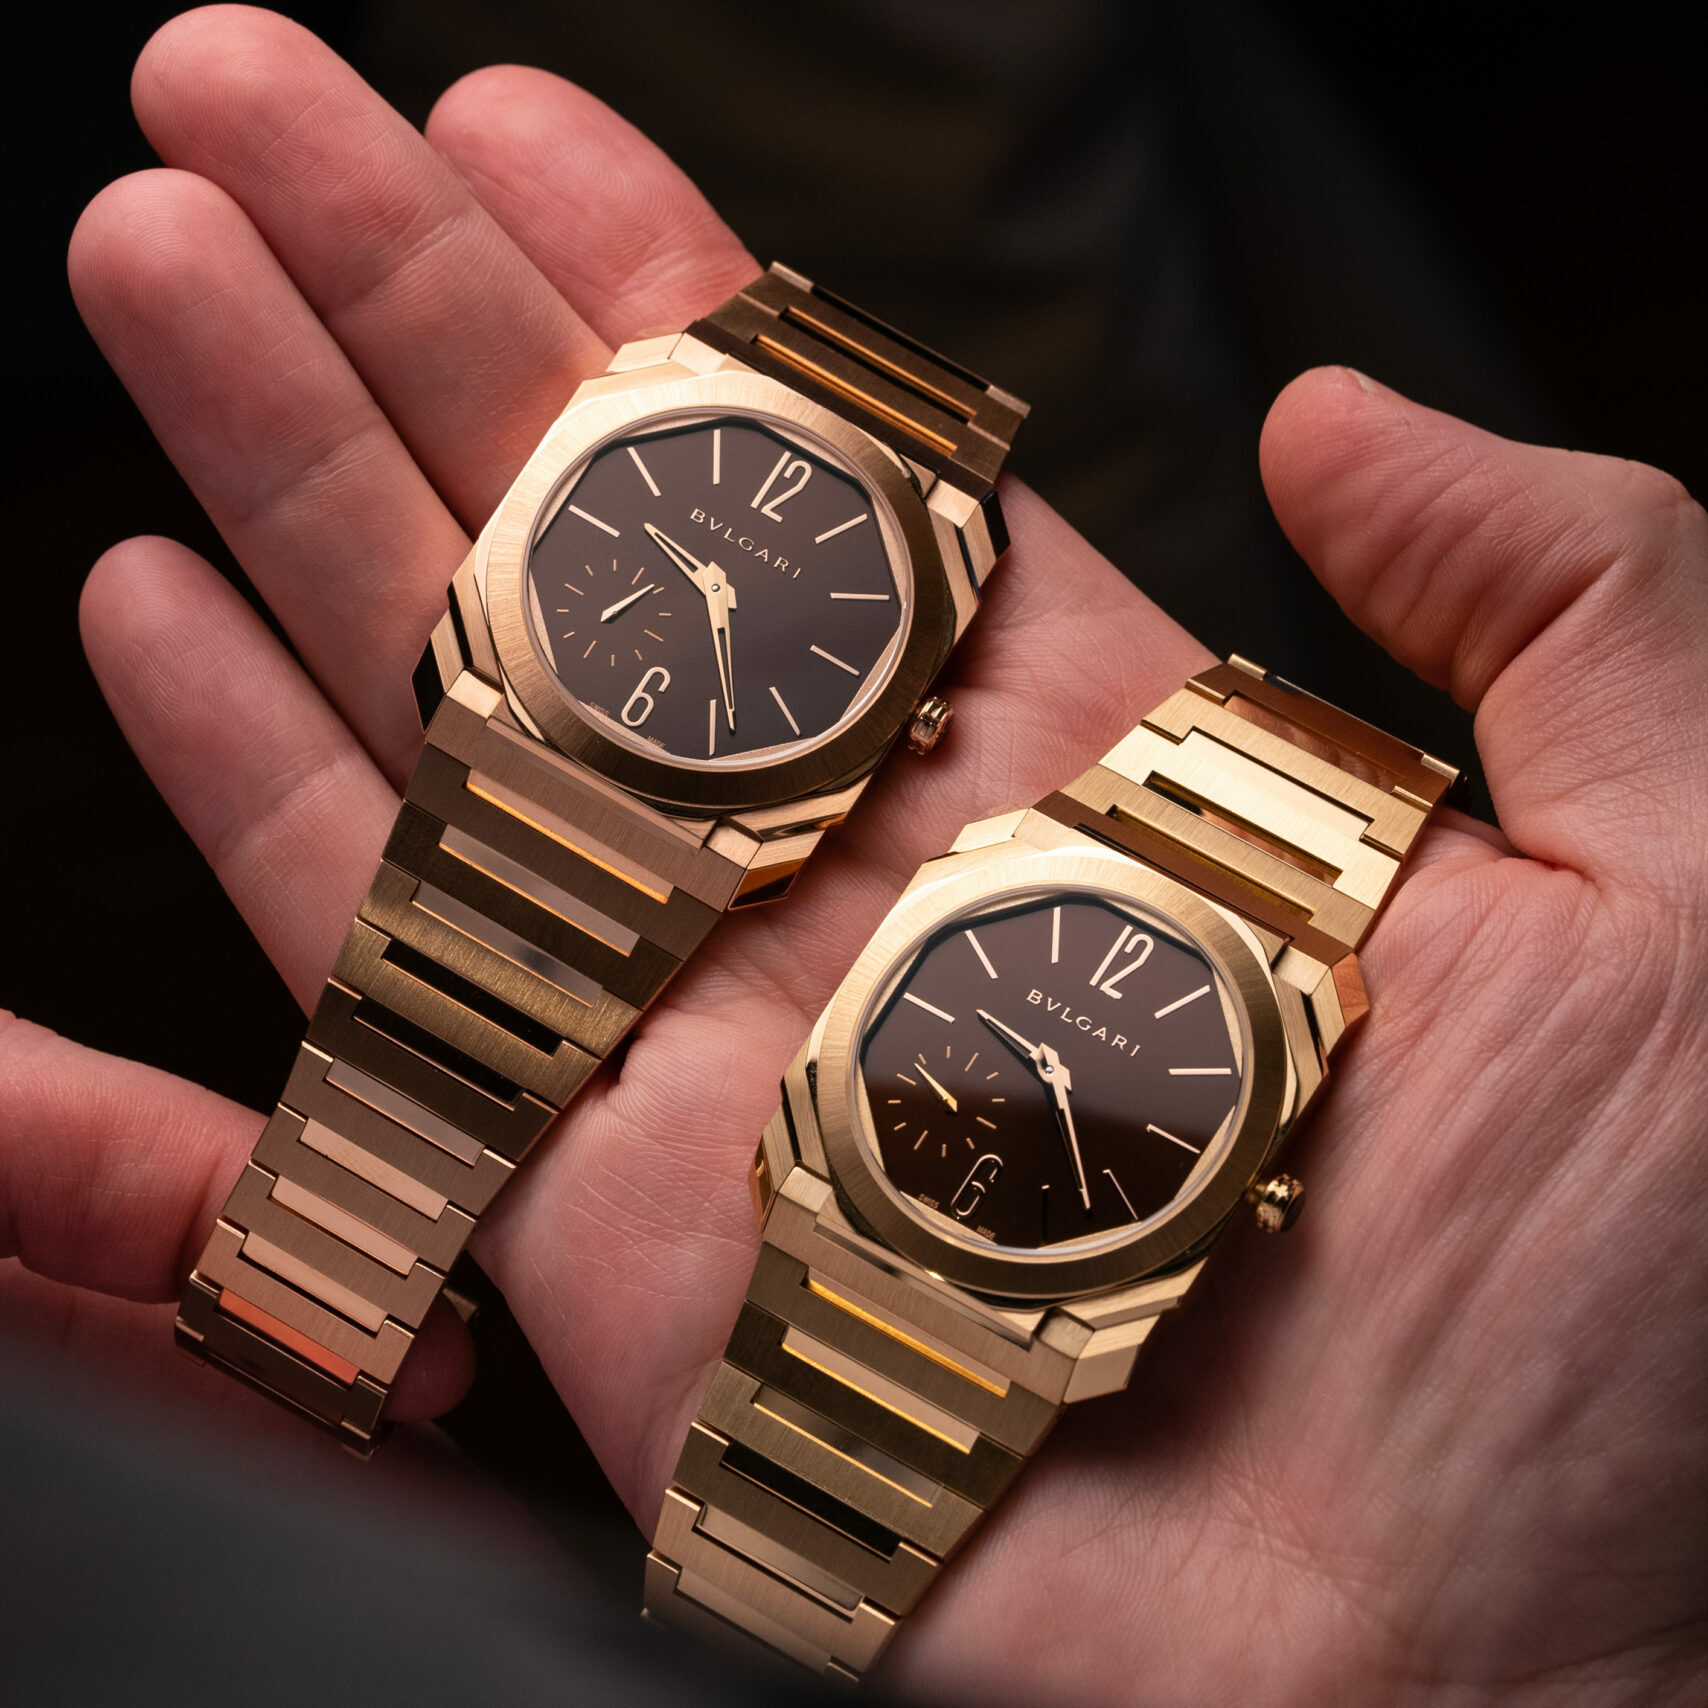 VIDEO: The new precious and polished Bulgari Octo Finissimo watches in rose and yellow gold